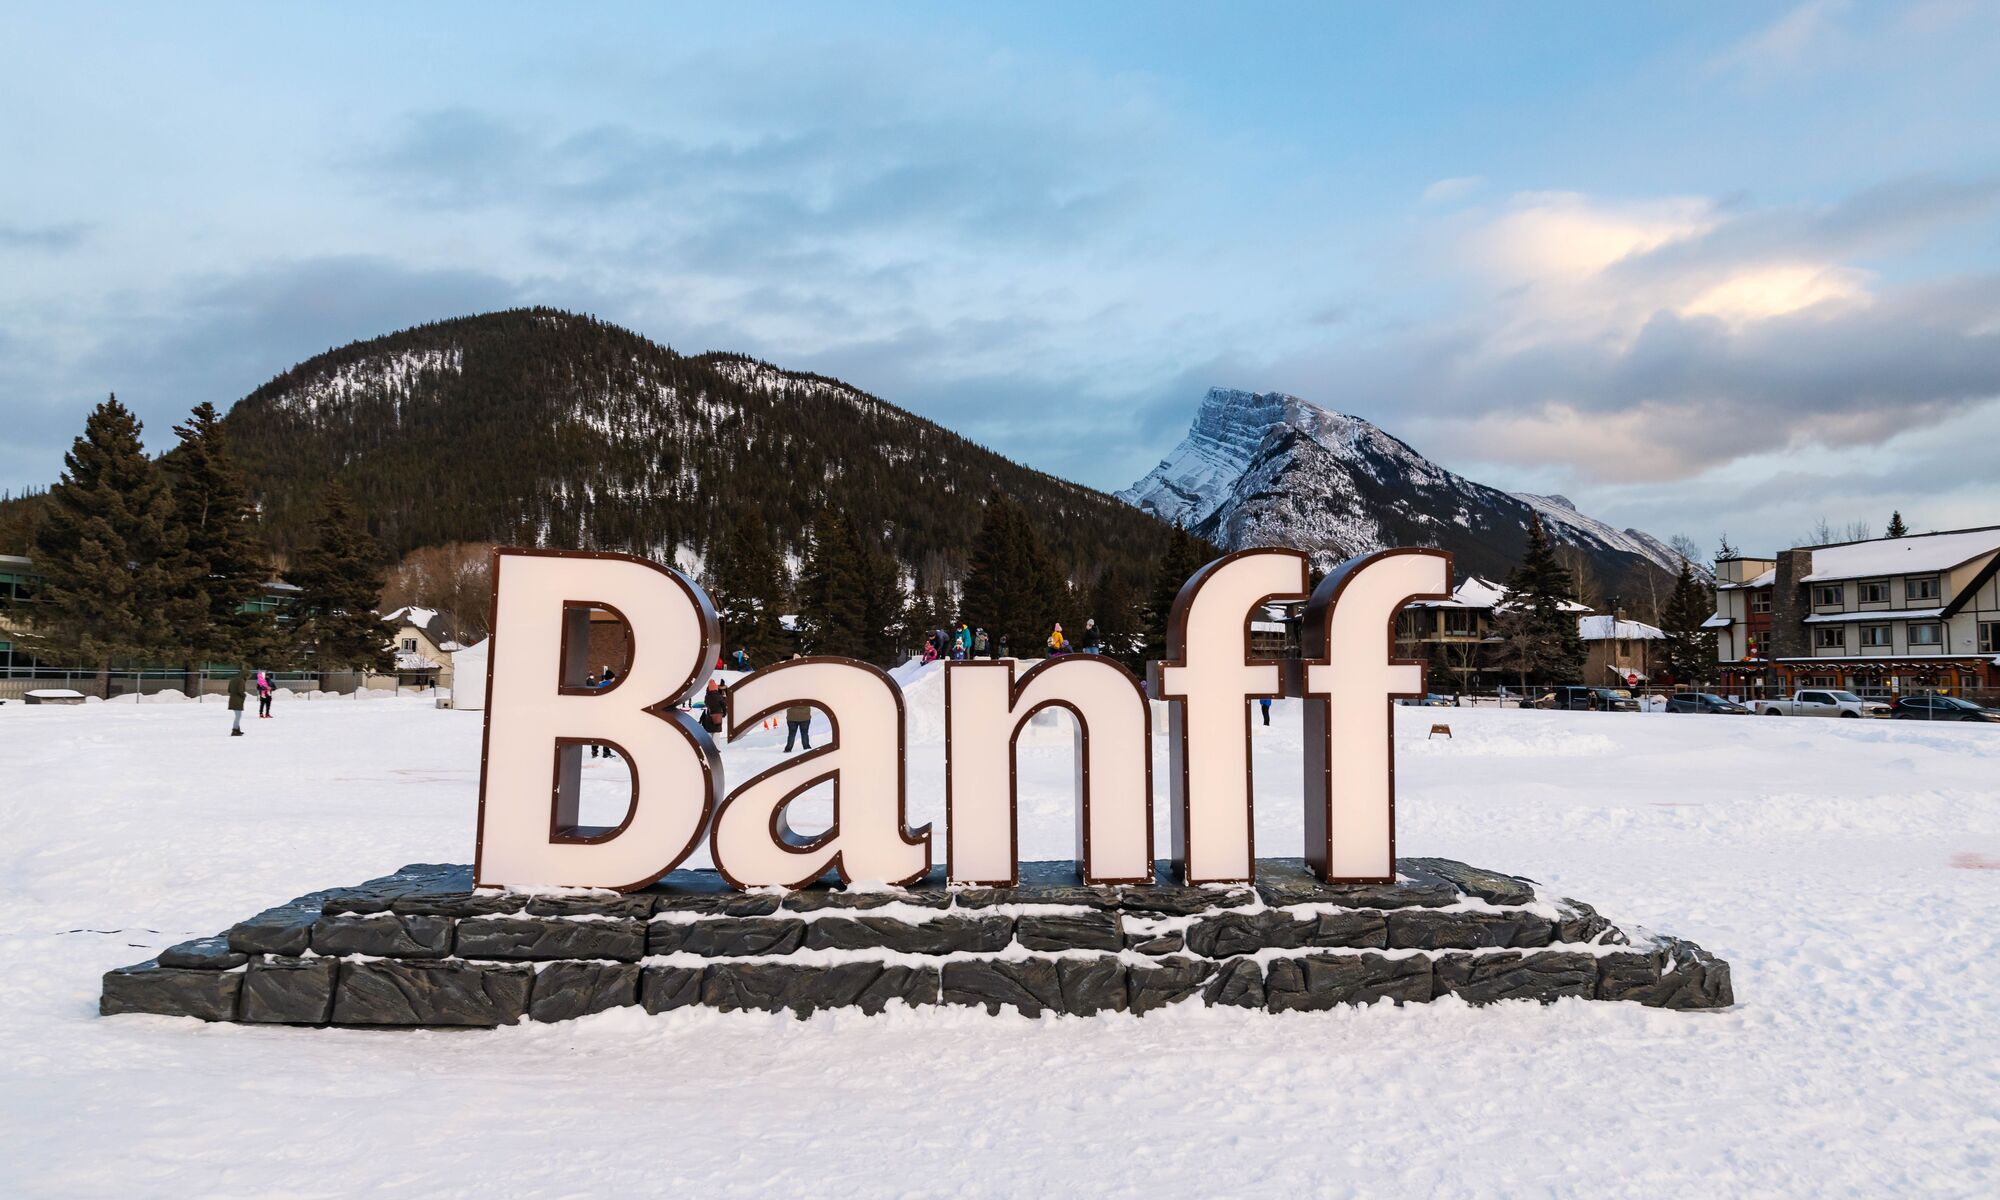 The illuminated Banff sign with Sulphur Mountain and Mount Rundle in the Banff townsite of Banff National Park.